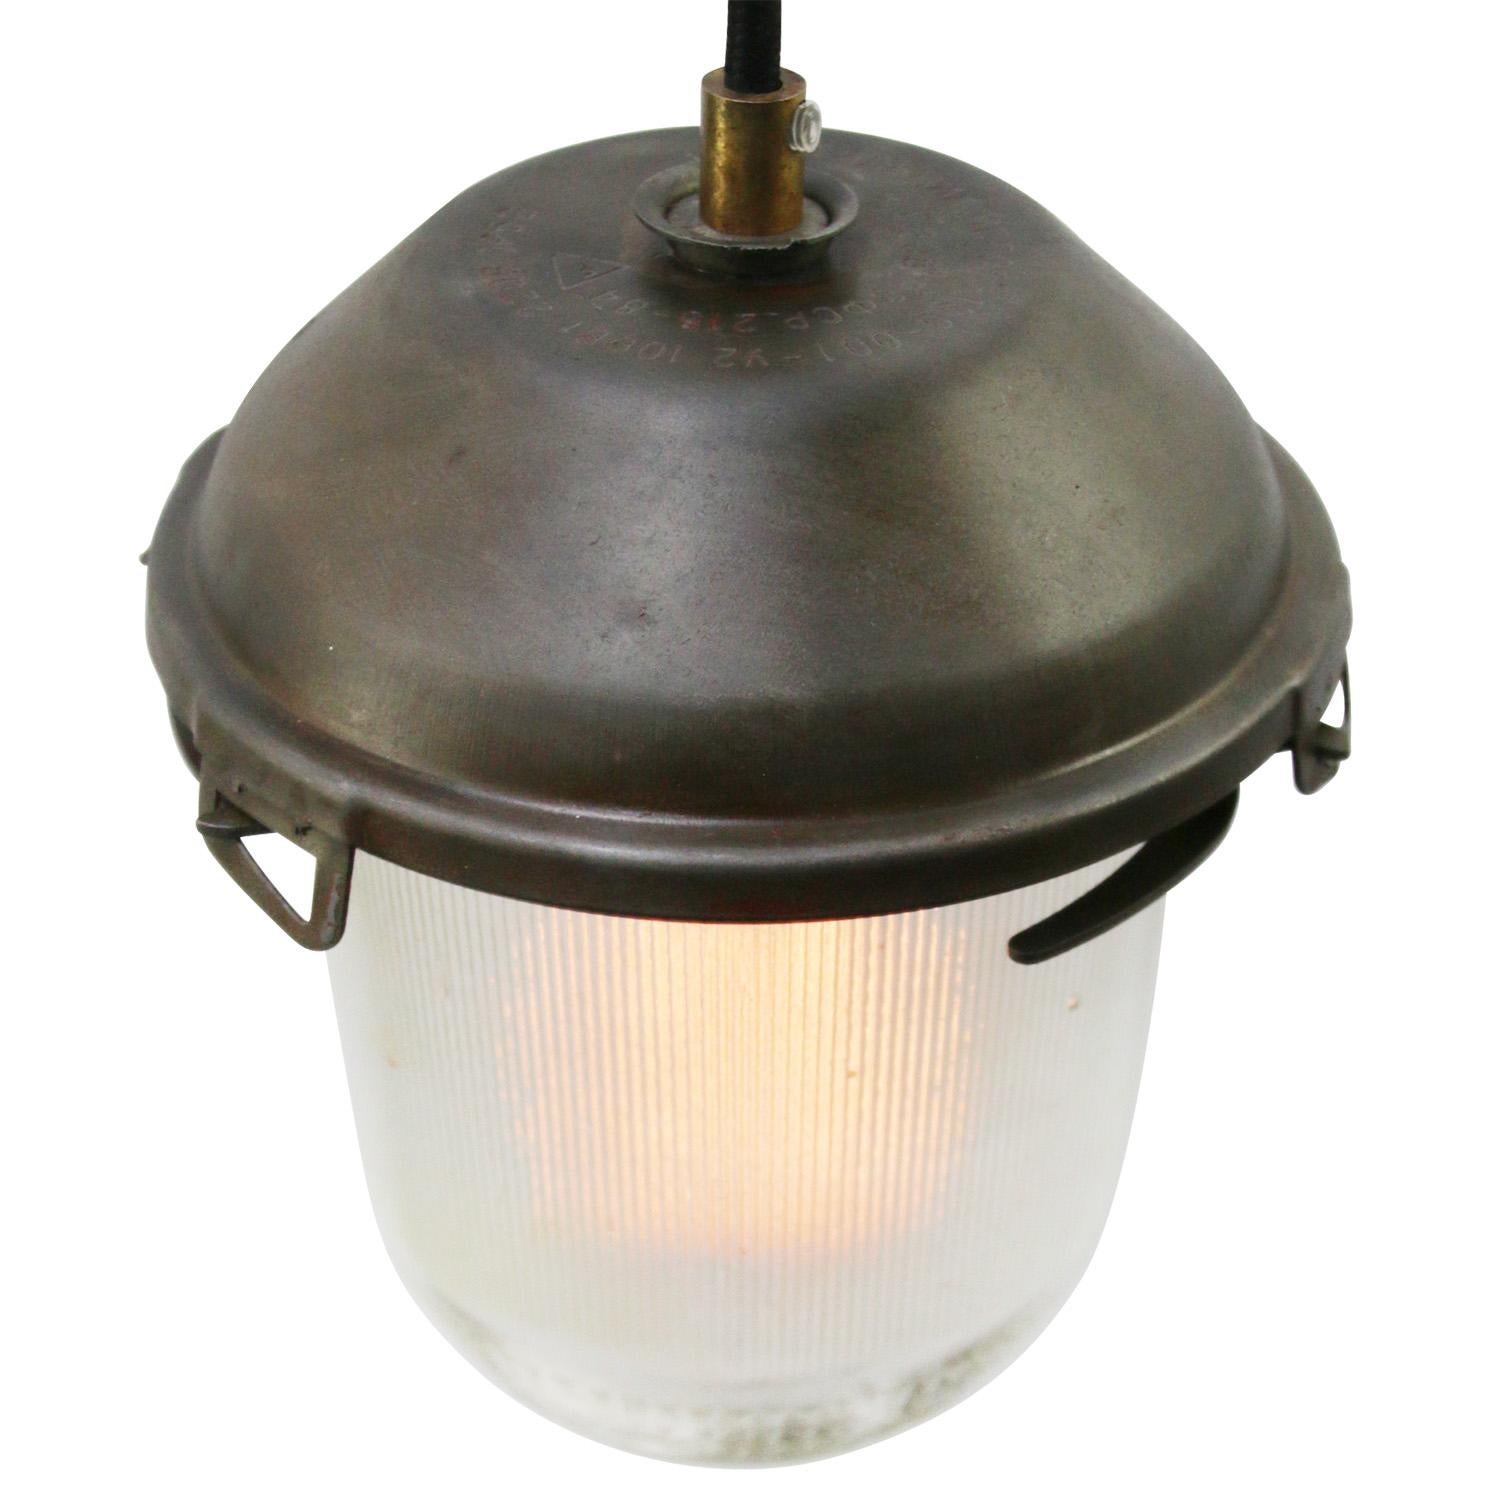 Small Industrial pendant light
Clear striped glass

Weight: 1.50 kg / 3.3 lb

Priced per individual item. All lamps have been made suitable by international standards for incandescent light bulbs, energy-efficient and LED bulbs. E26/E27 bulb holders